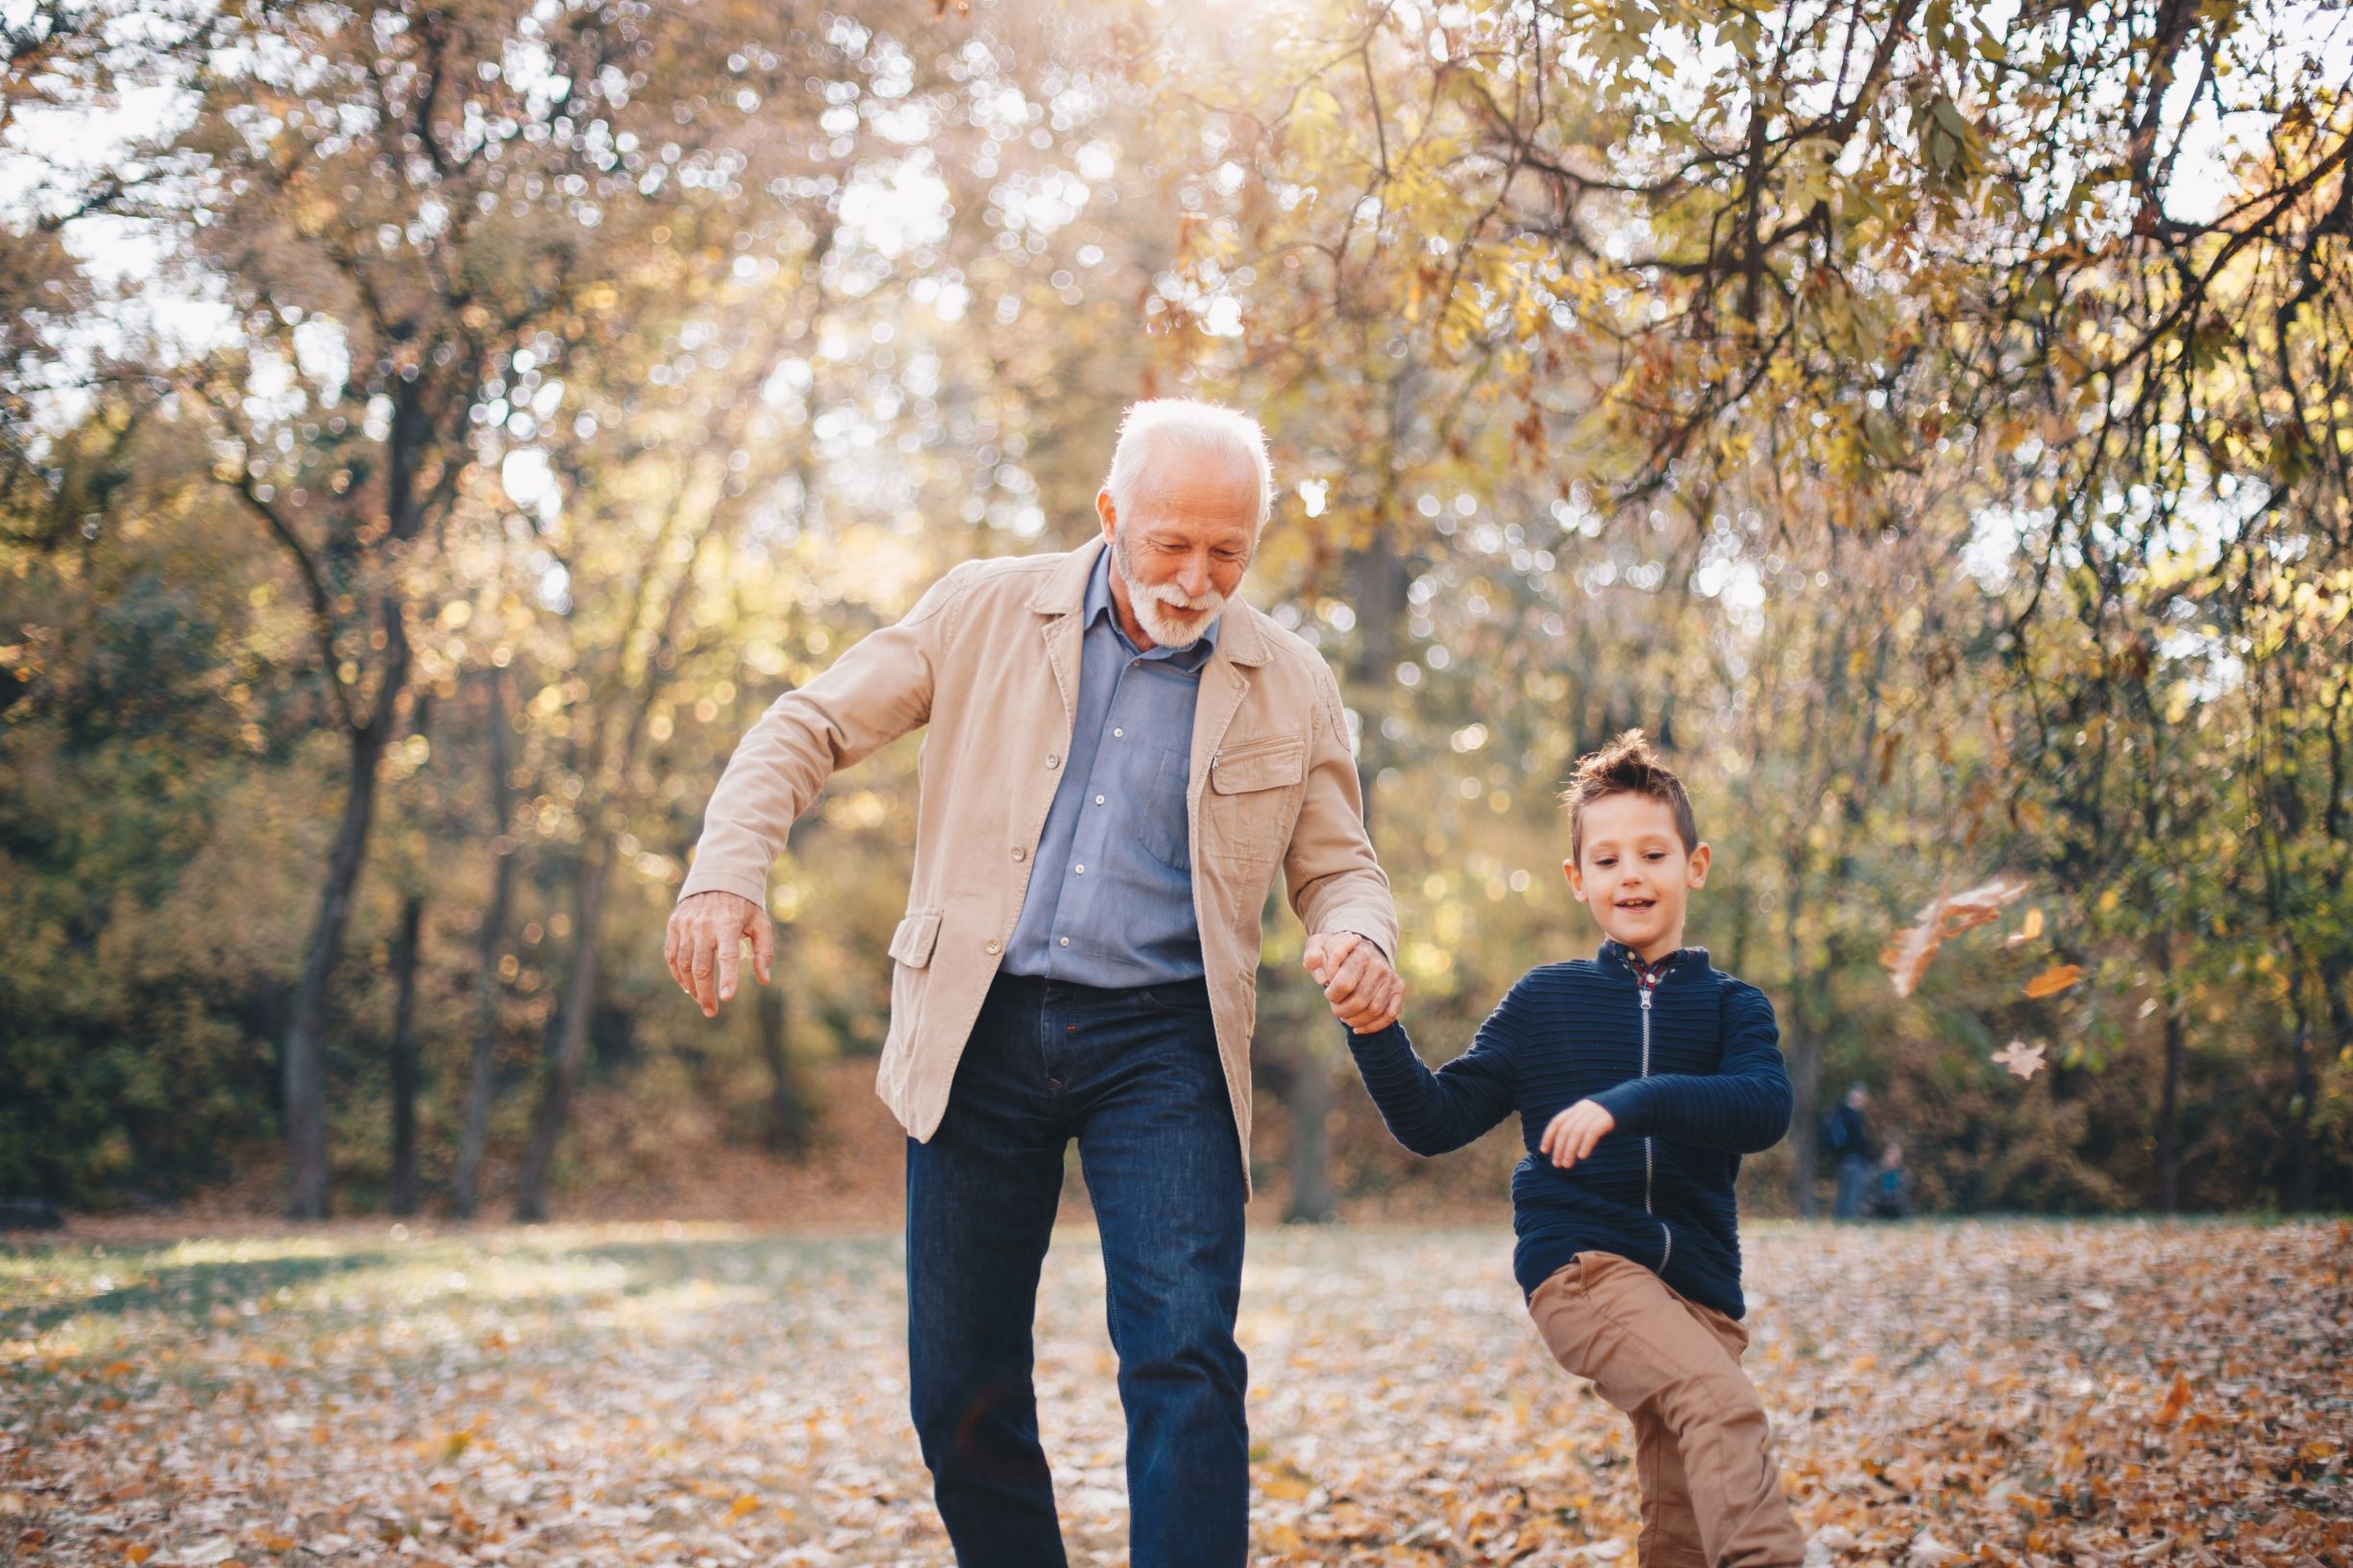 A man and his grandson kick up leaves as they walk in the park. Walking is an enjoyable and beneficial exercise for heart health. Taking children along can make the activity more fun, allowing you to smile and laugh with them while living in the moment.